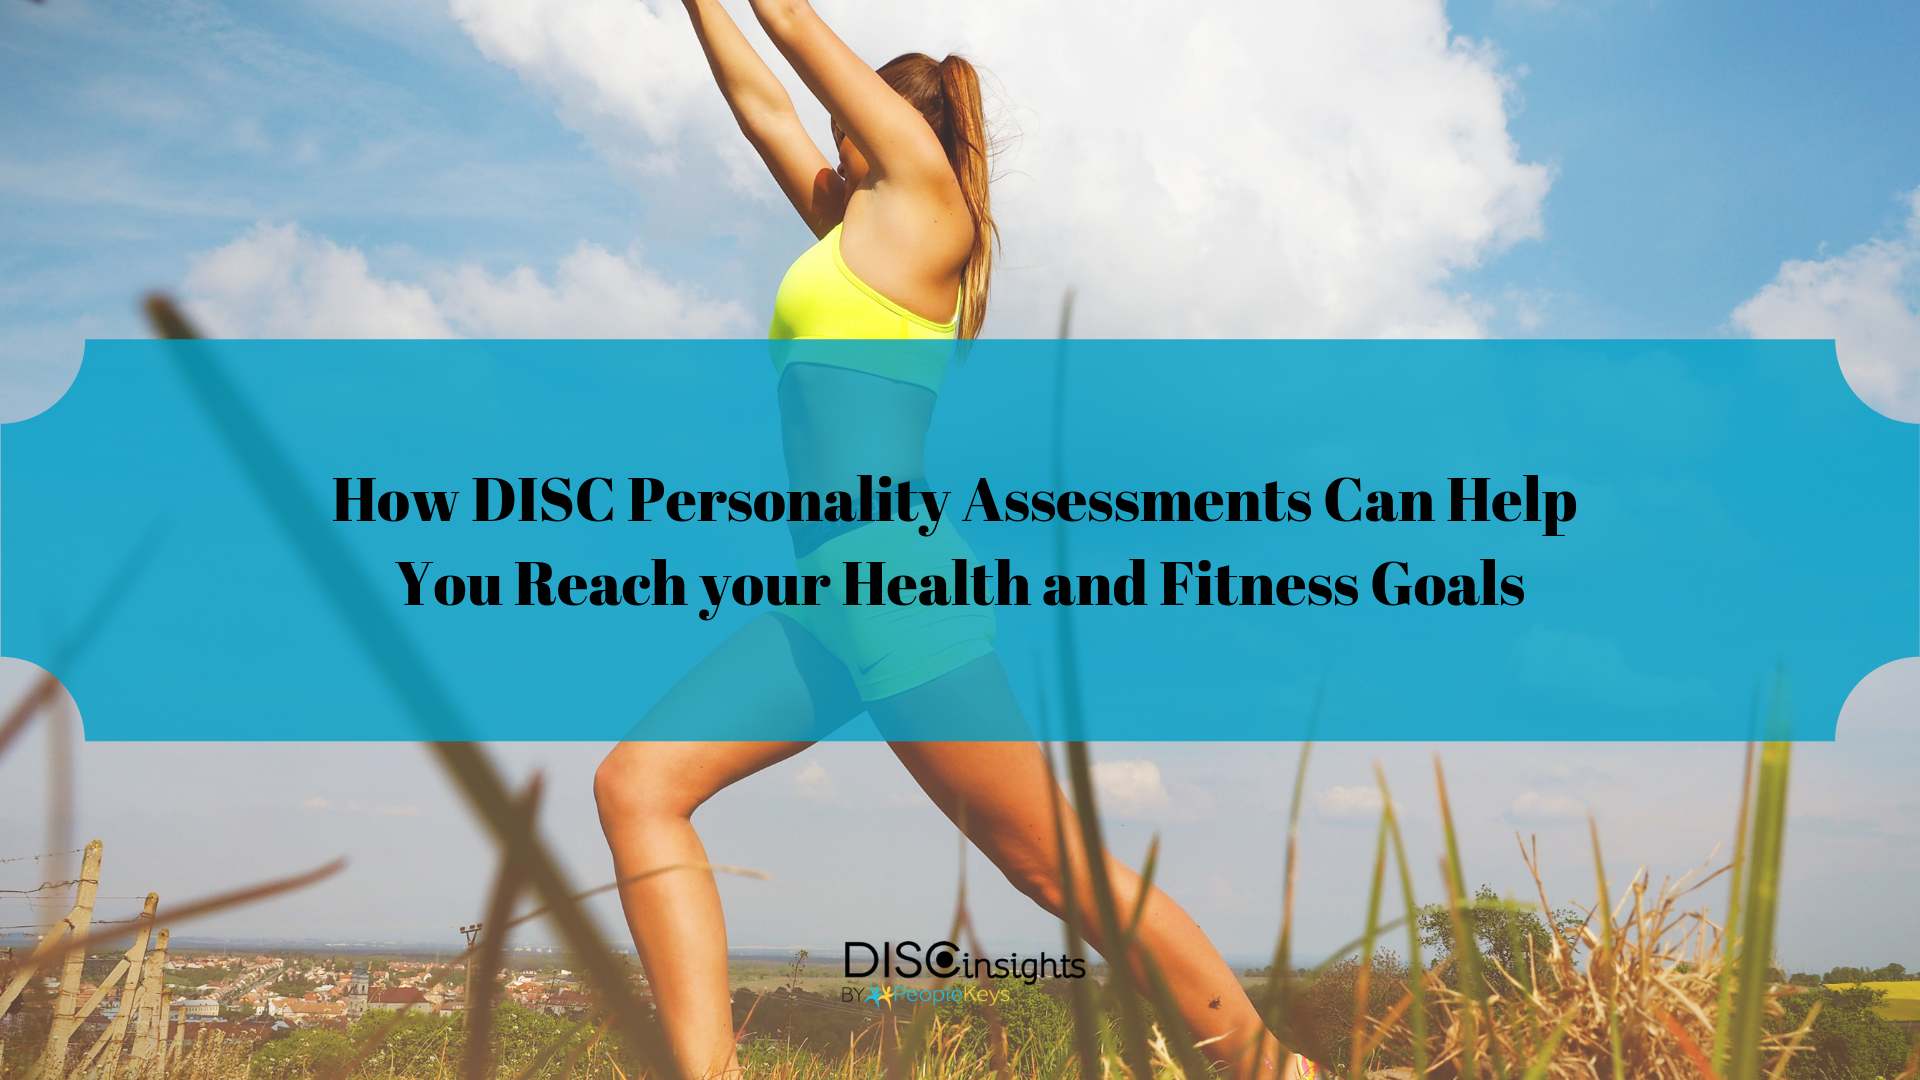 How DISC Personality Assessments Can Help You Reach your Health and Fitness Goals